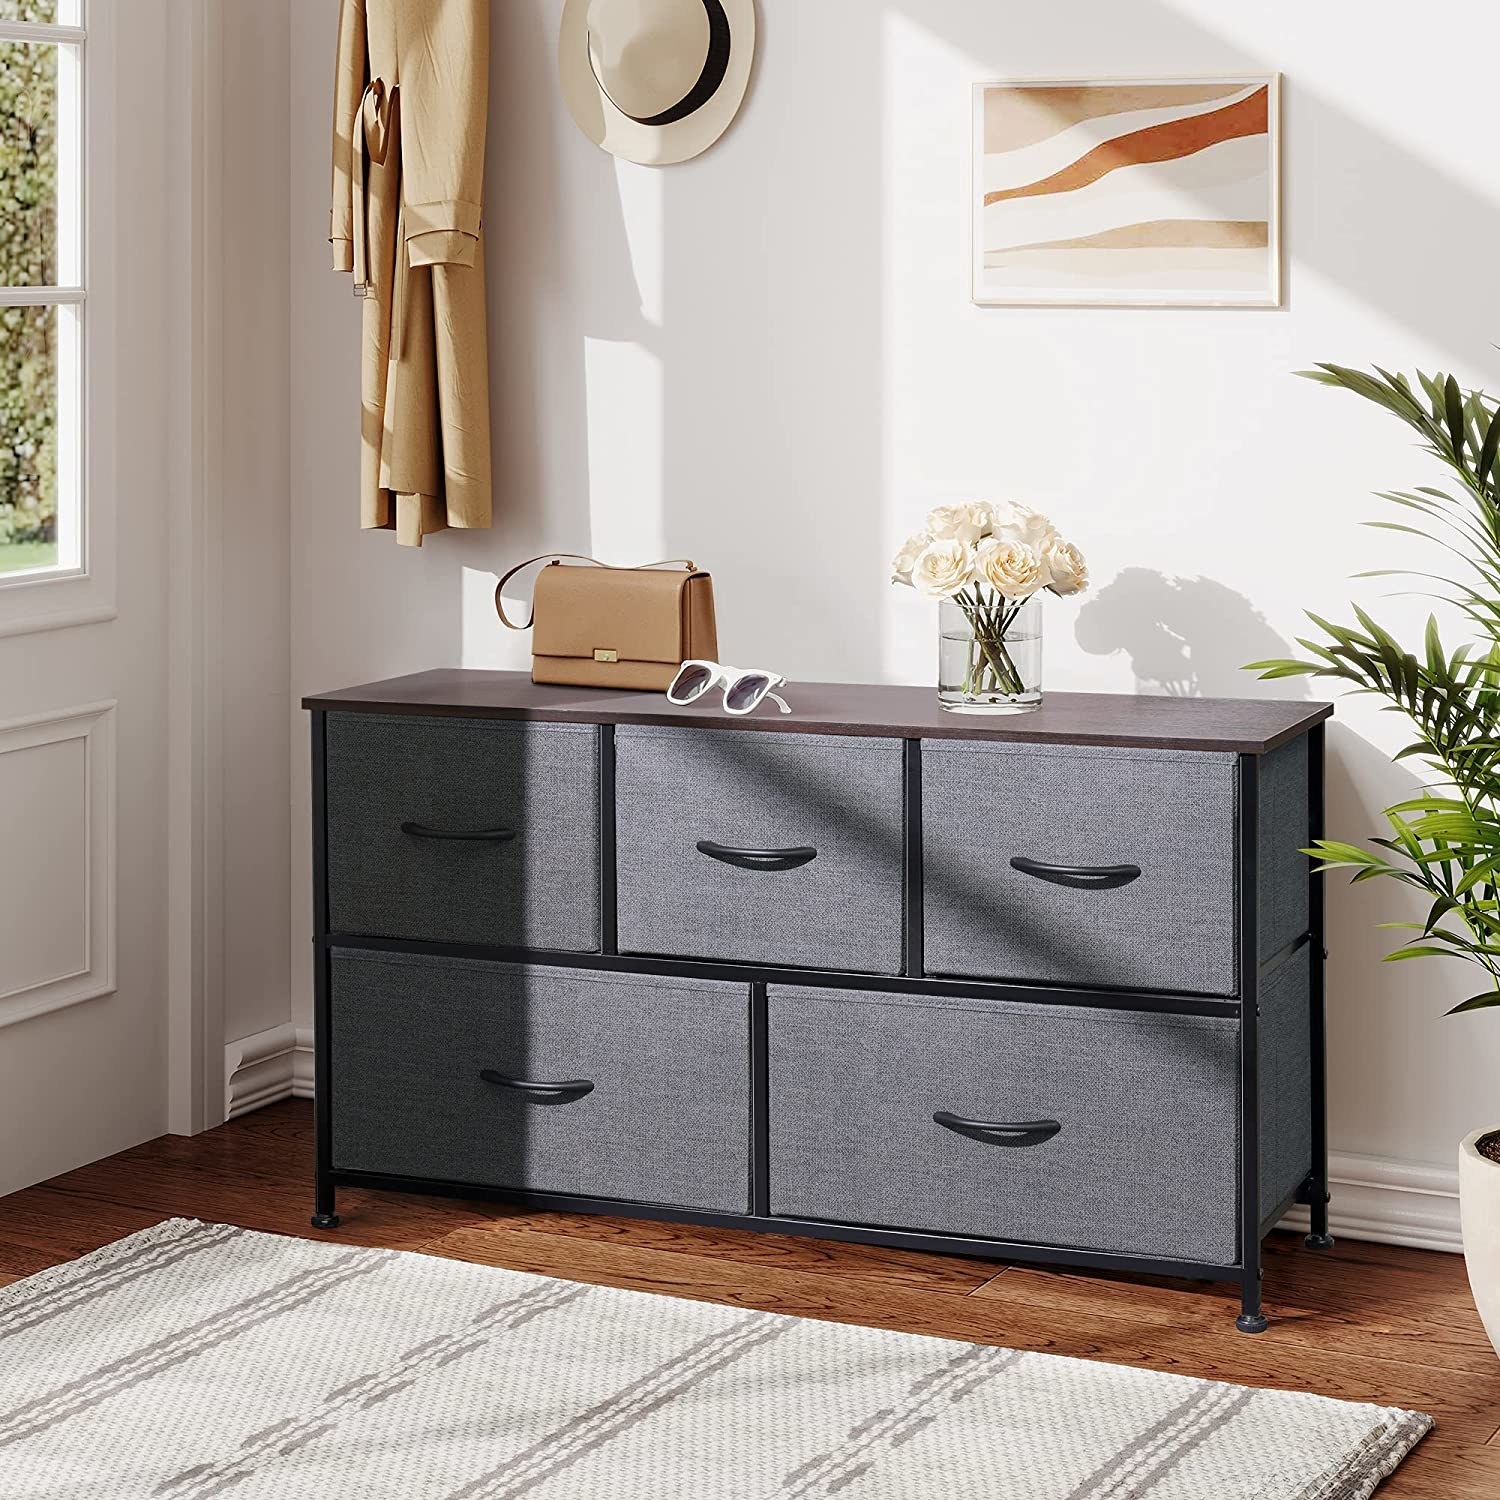 the dresser in charcoal gray with five storage drawers